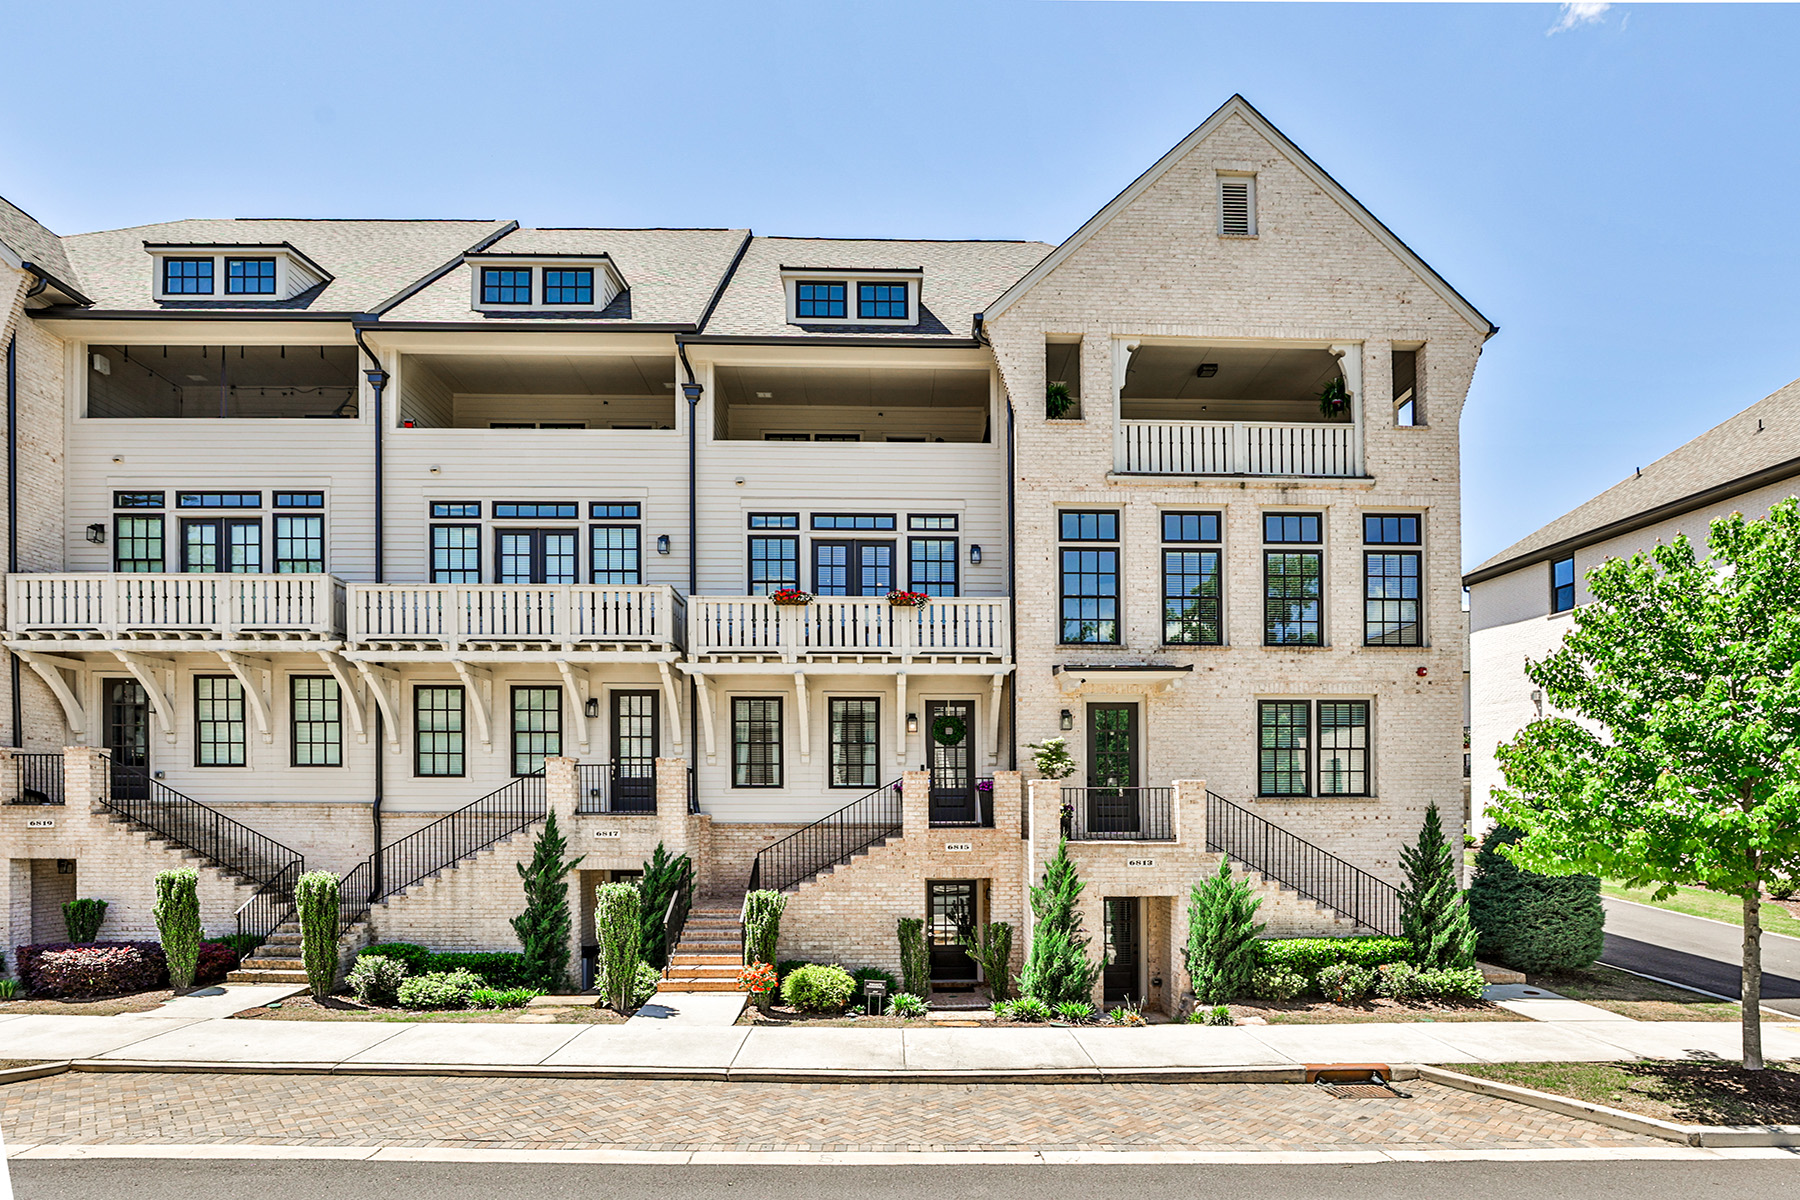 Better Than New Construction Townhome with Unrivaled Amenities